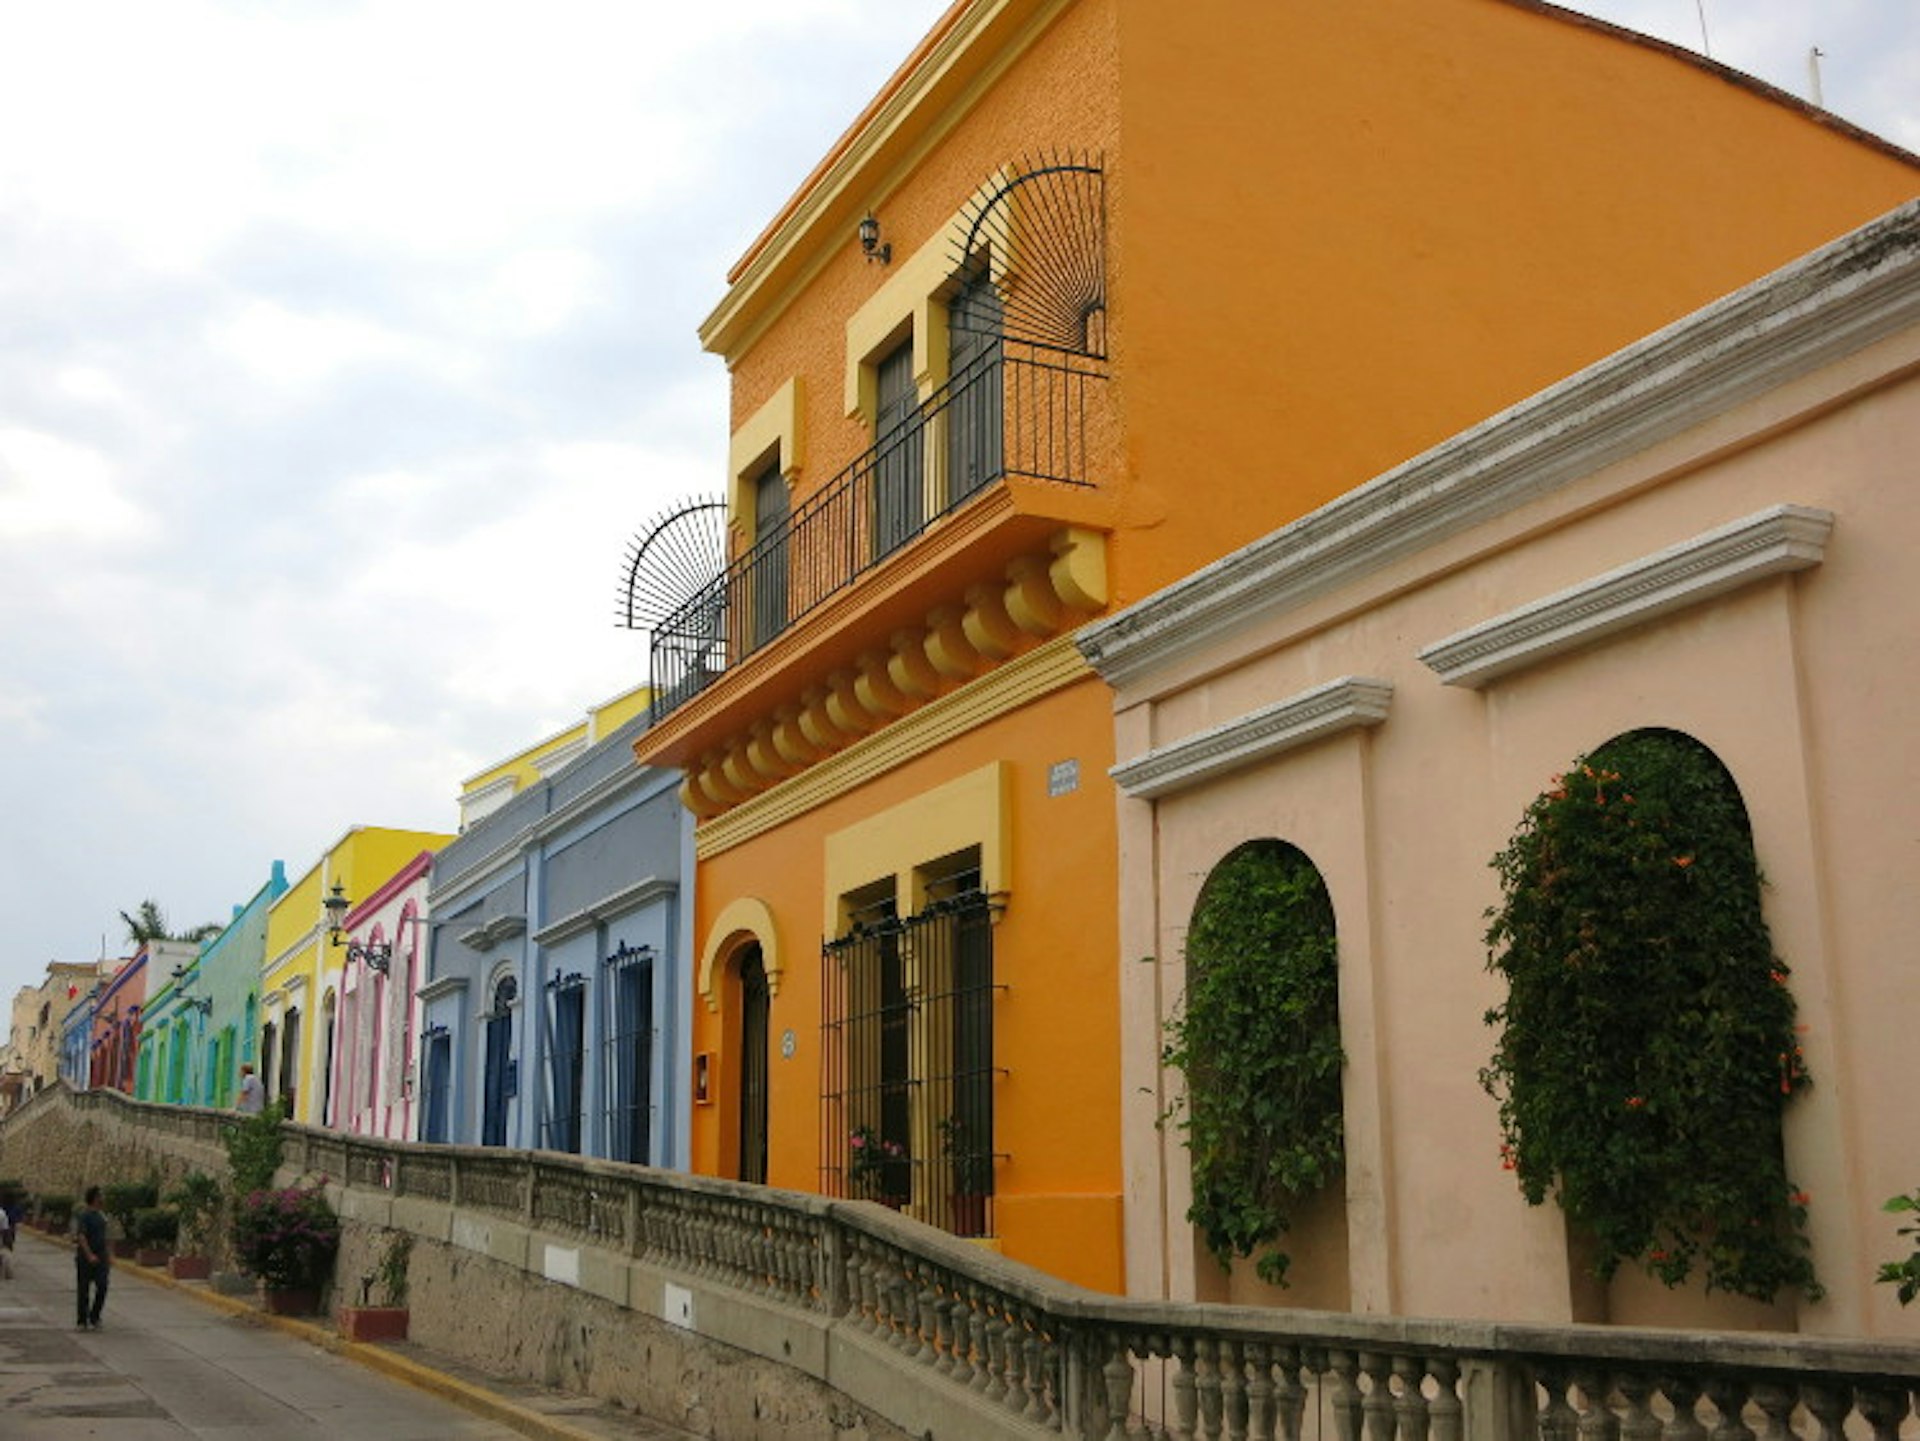 Multi-colored houses, like these on Calle Flores, are typical in Mazatlán. Image by Clifton Wilkinson / Lonely Planet